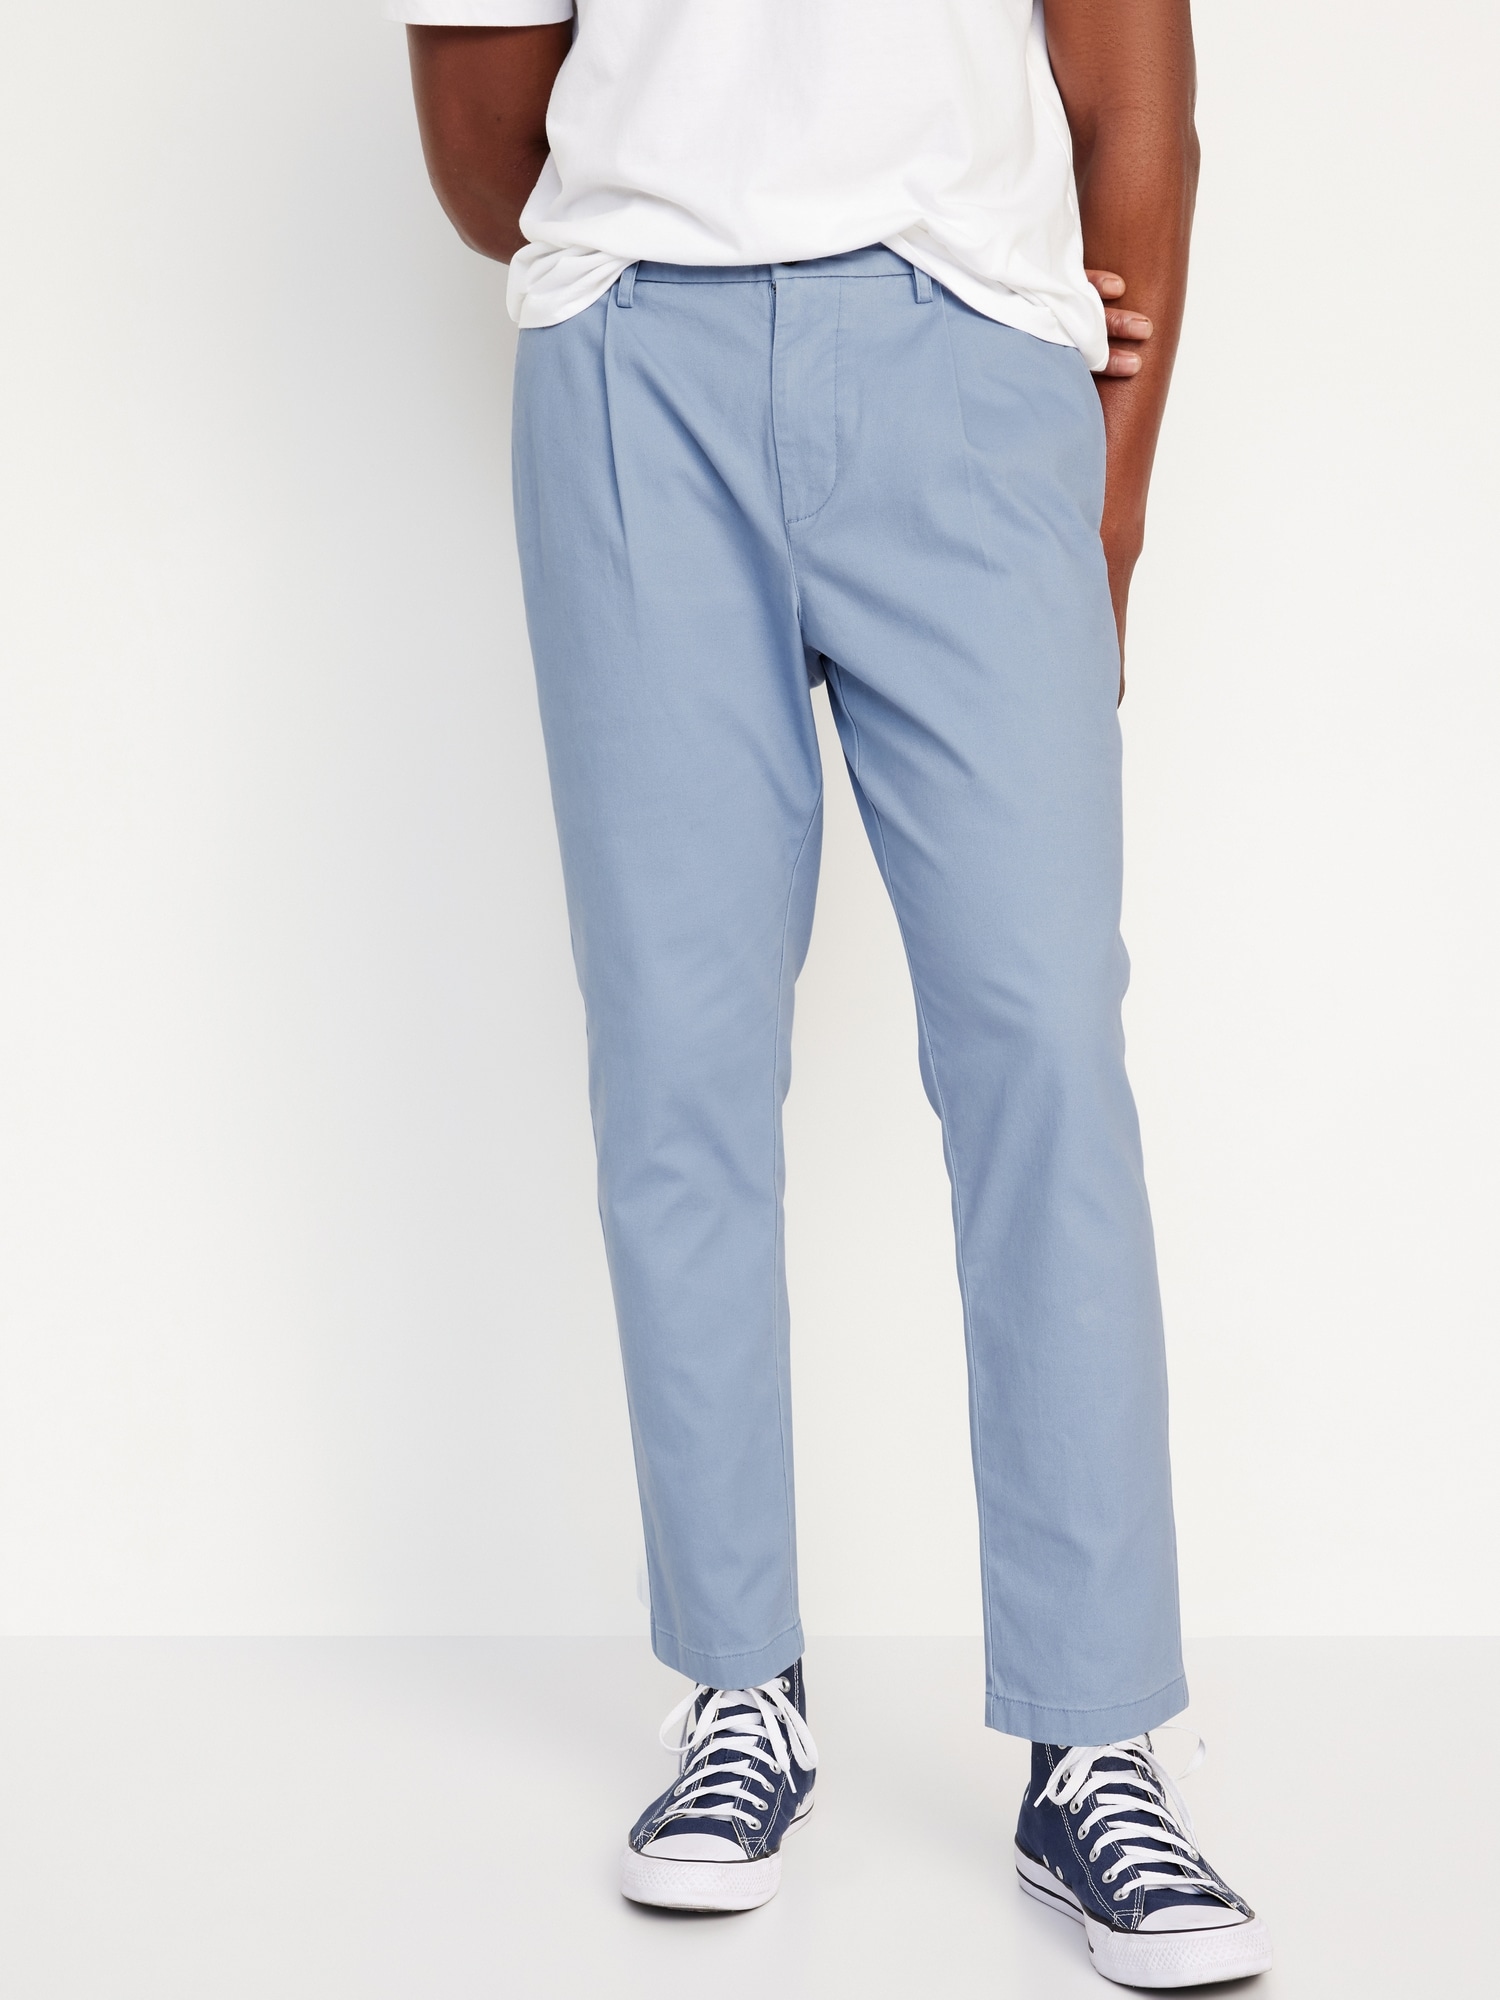 Loose Taper Built-In Flex Pleated Ankle Chino Hot Deal